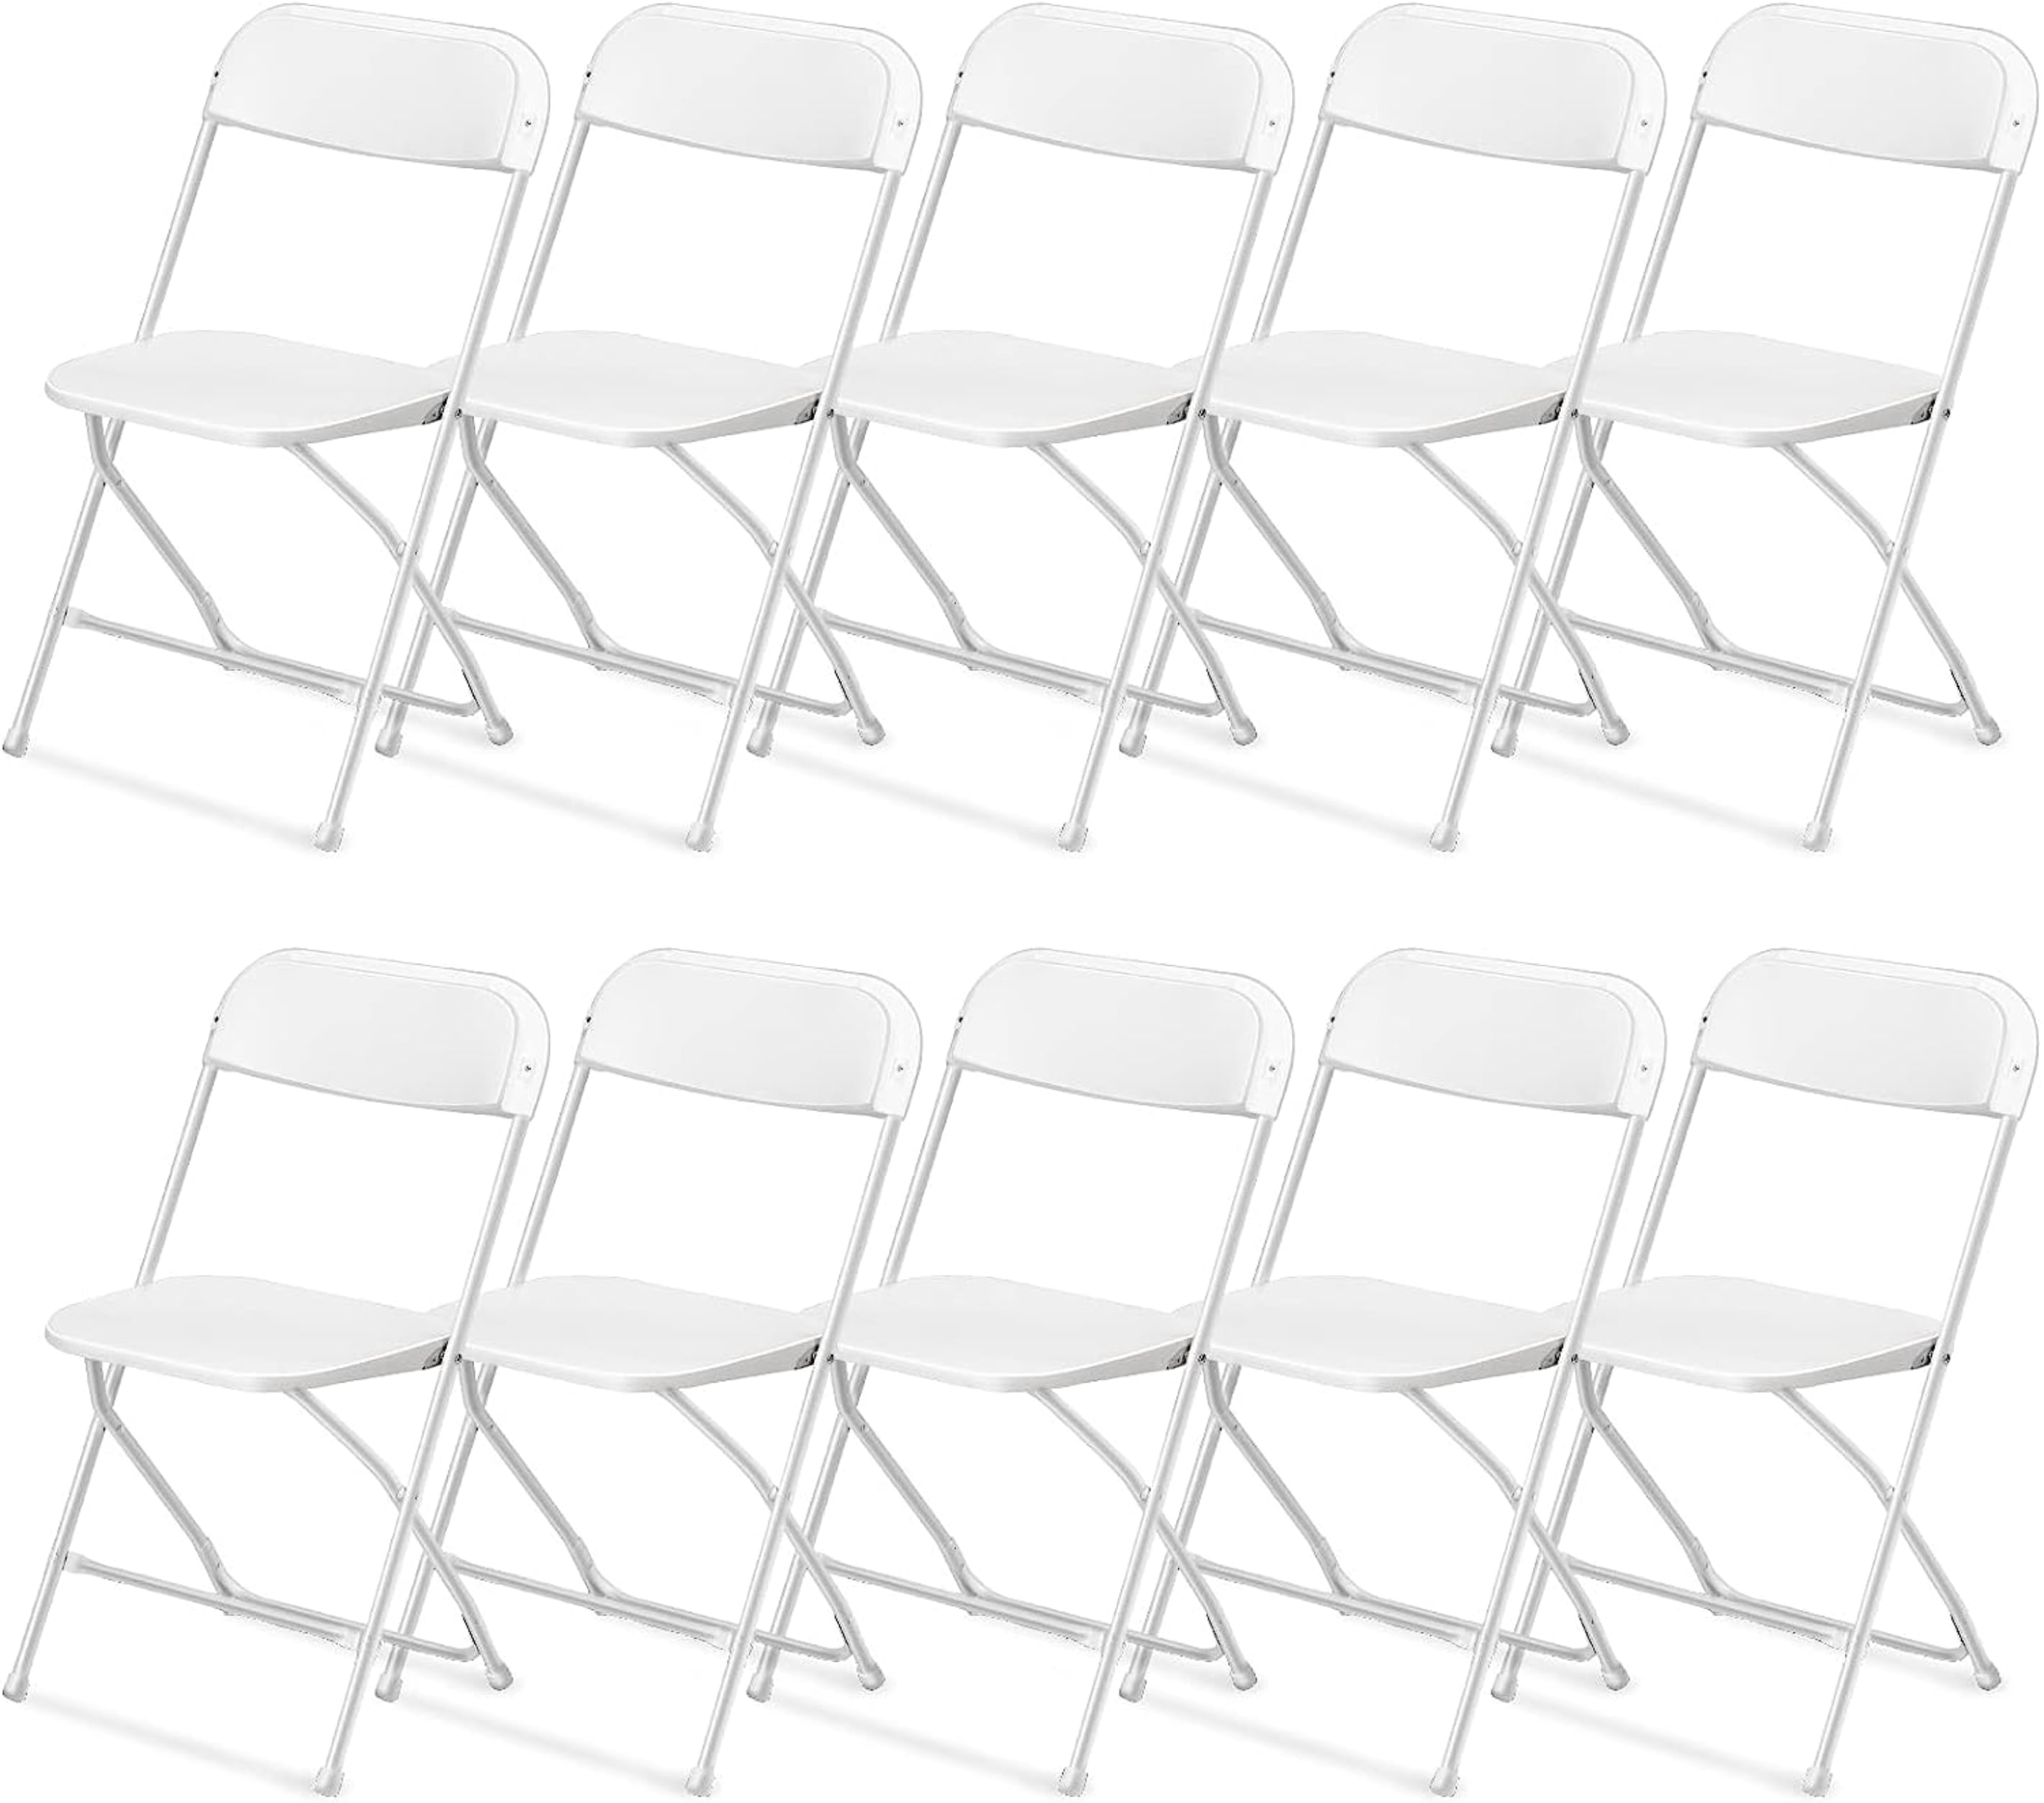 UBesGoo 10 Packs Plastic Folding Chairs Wedding Banquet Seat Party Event Chair for Adults Promo